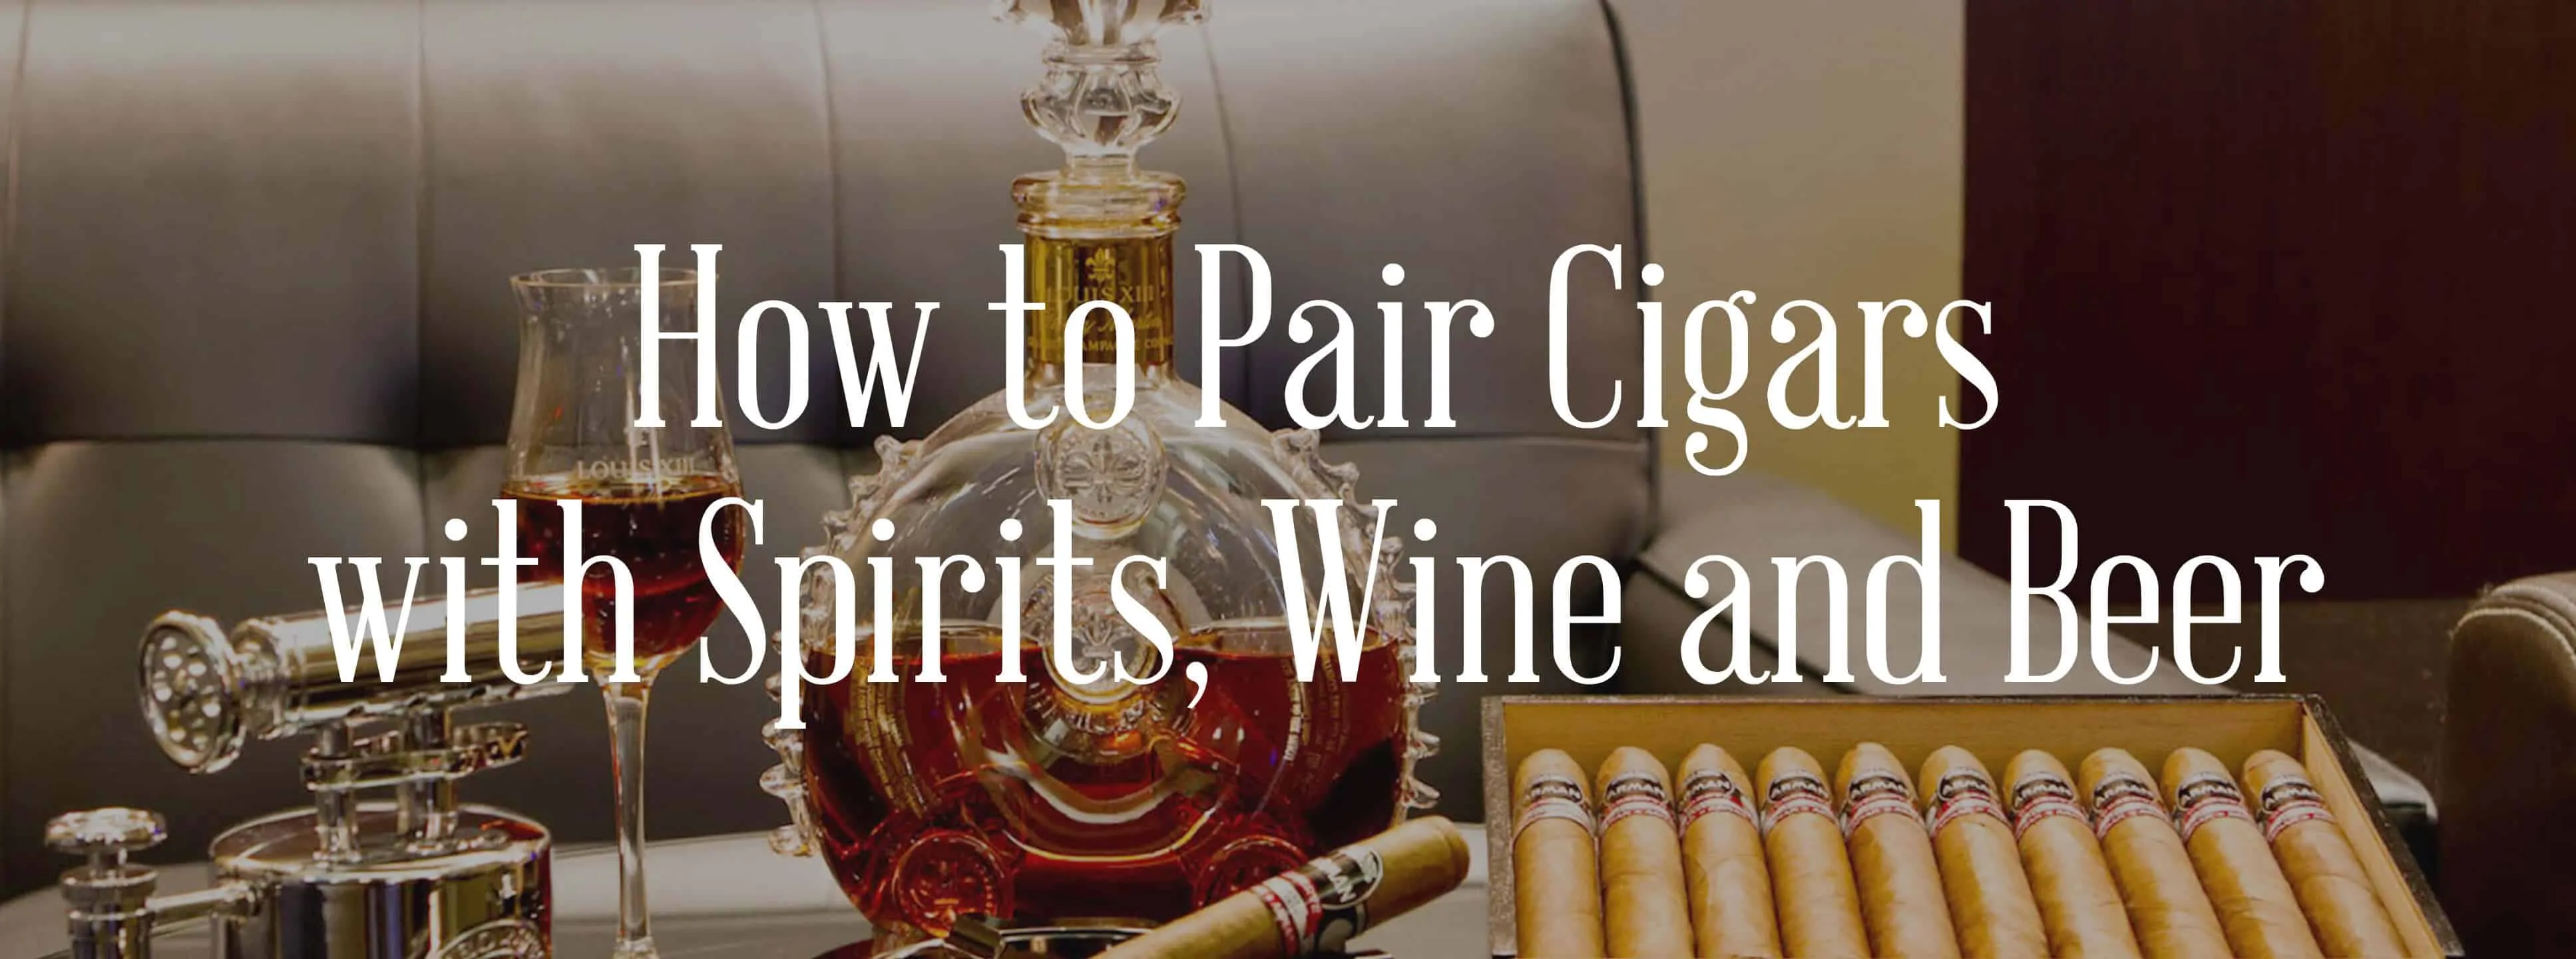 How to Pair Cigars with Spirits Wine and Beer